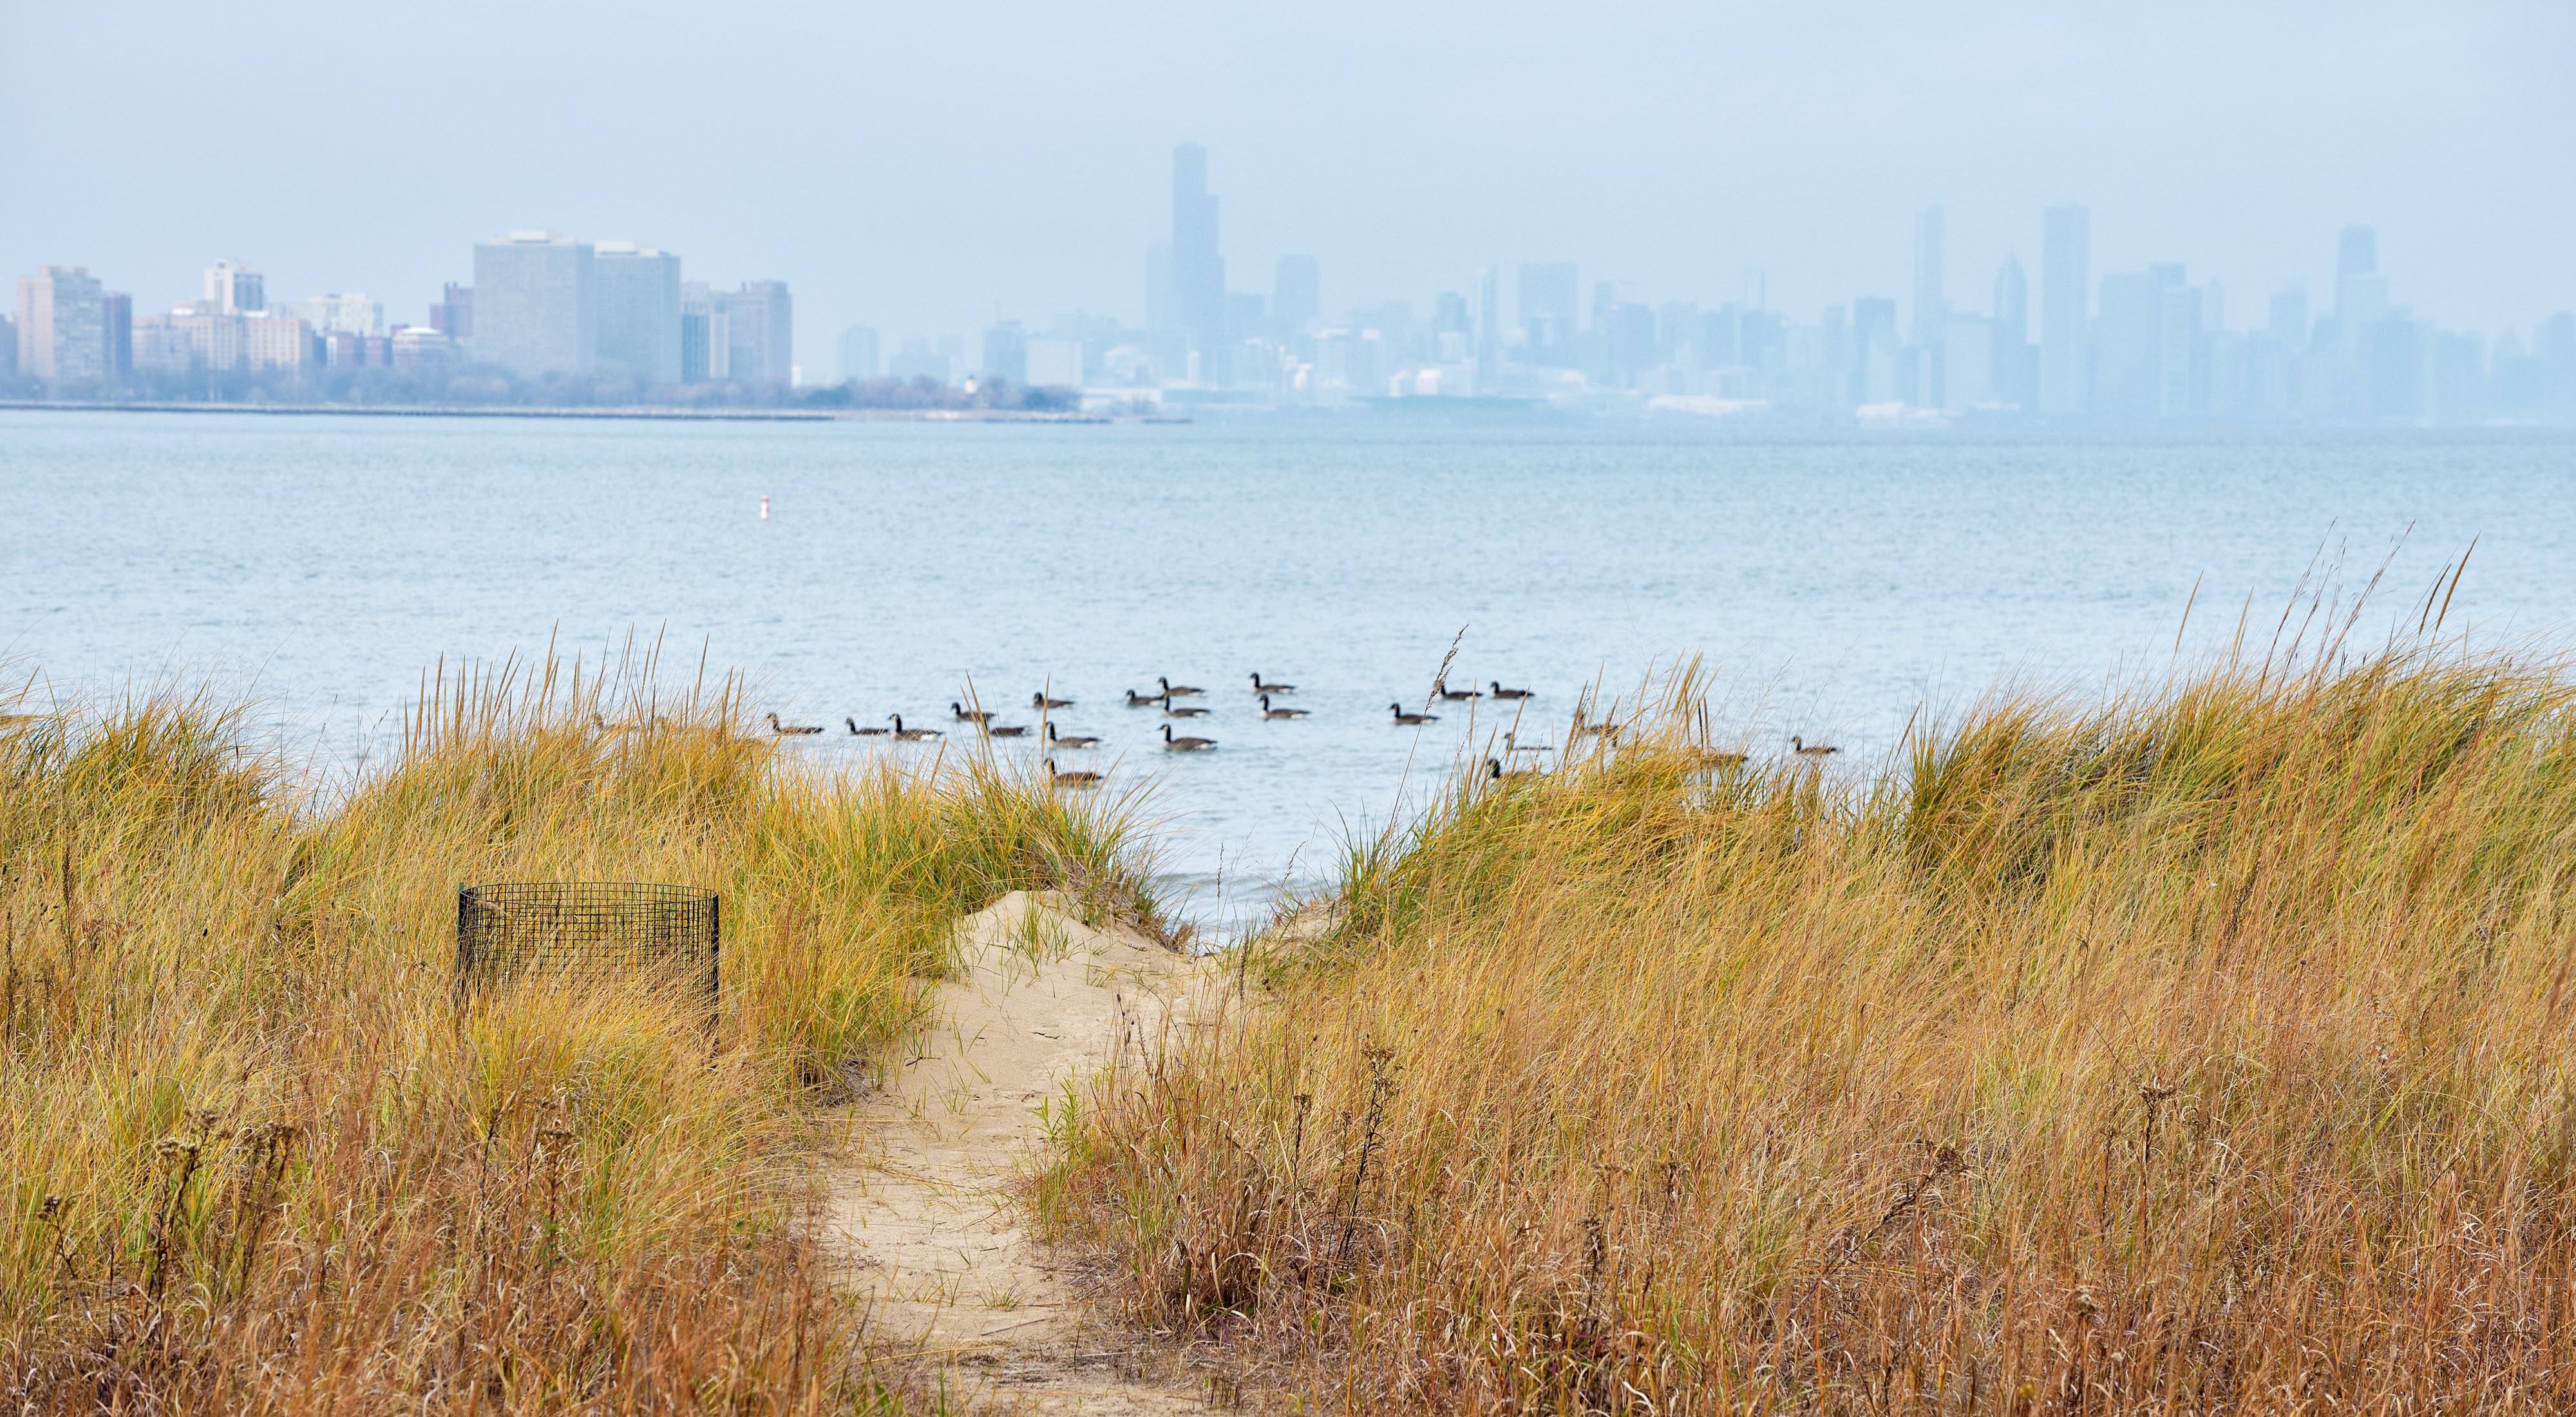 A pathway through a grassy area overlooking a body of water and the Chicago skyline at the Rainbow Beach Park Natural Area.